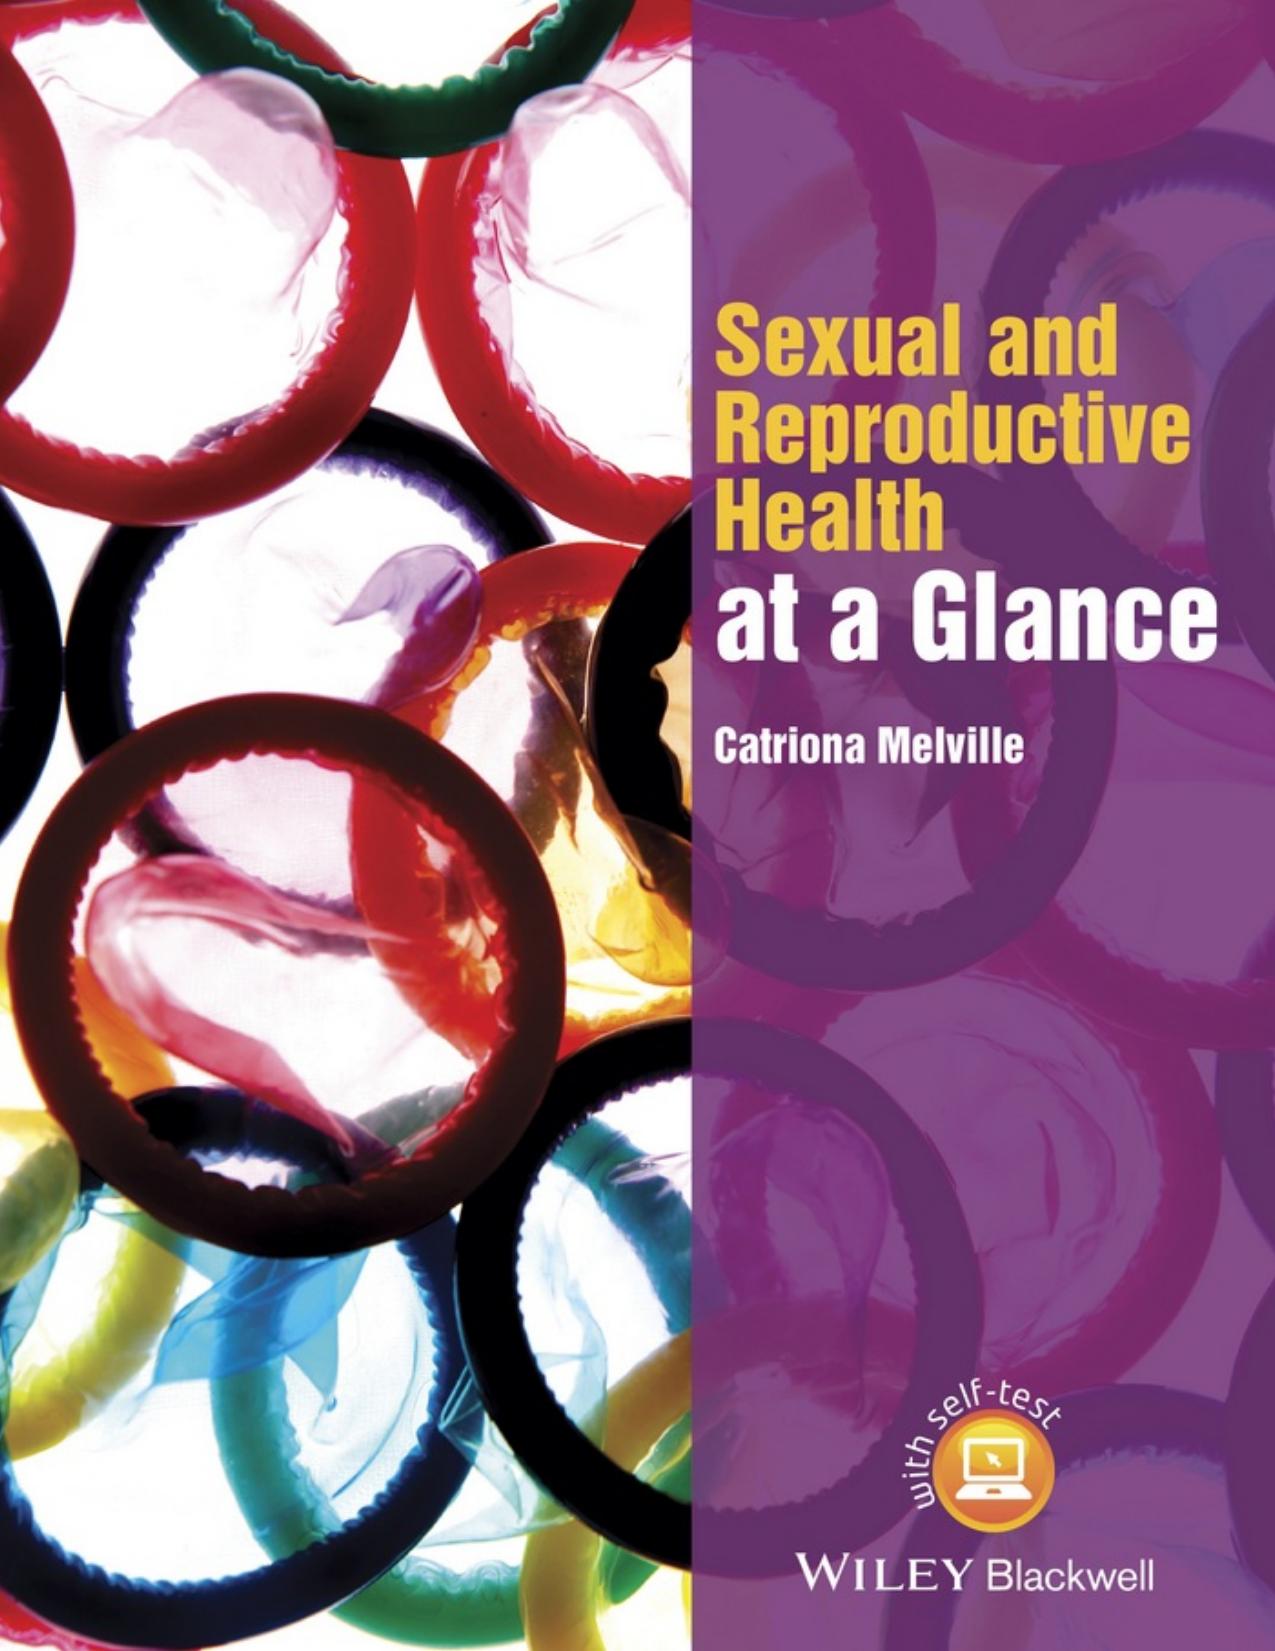 Sexual and reproductive health at a glance - PDFDrive.com